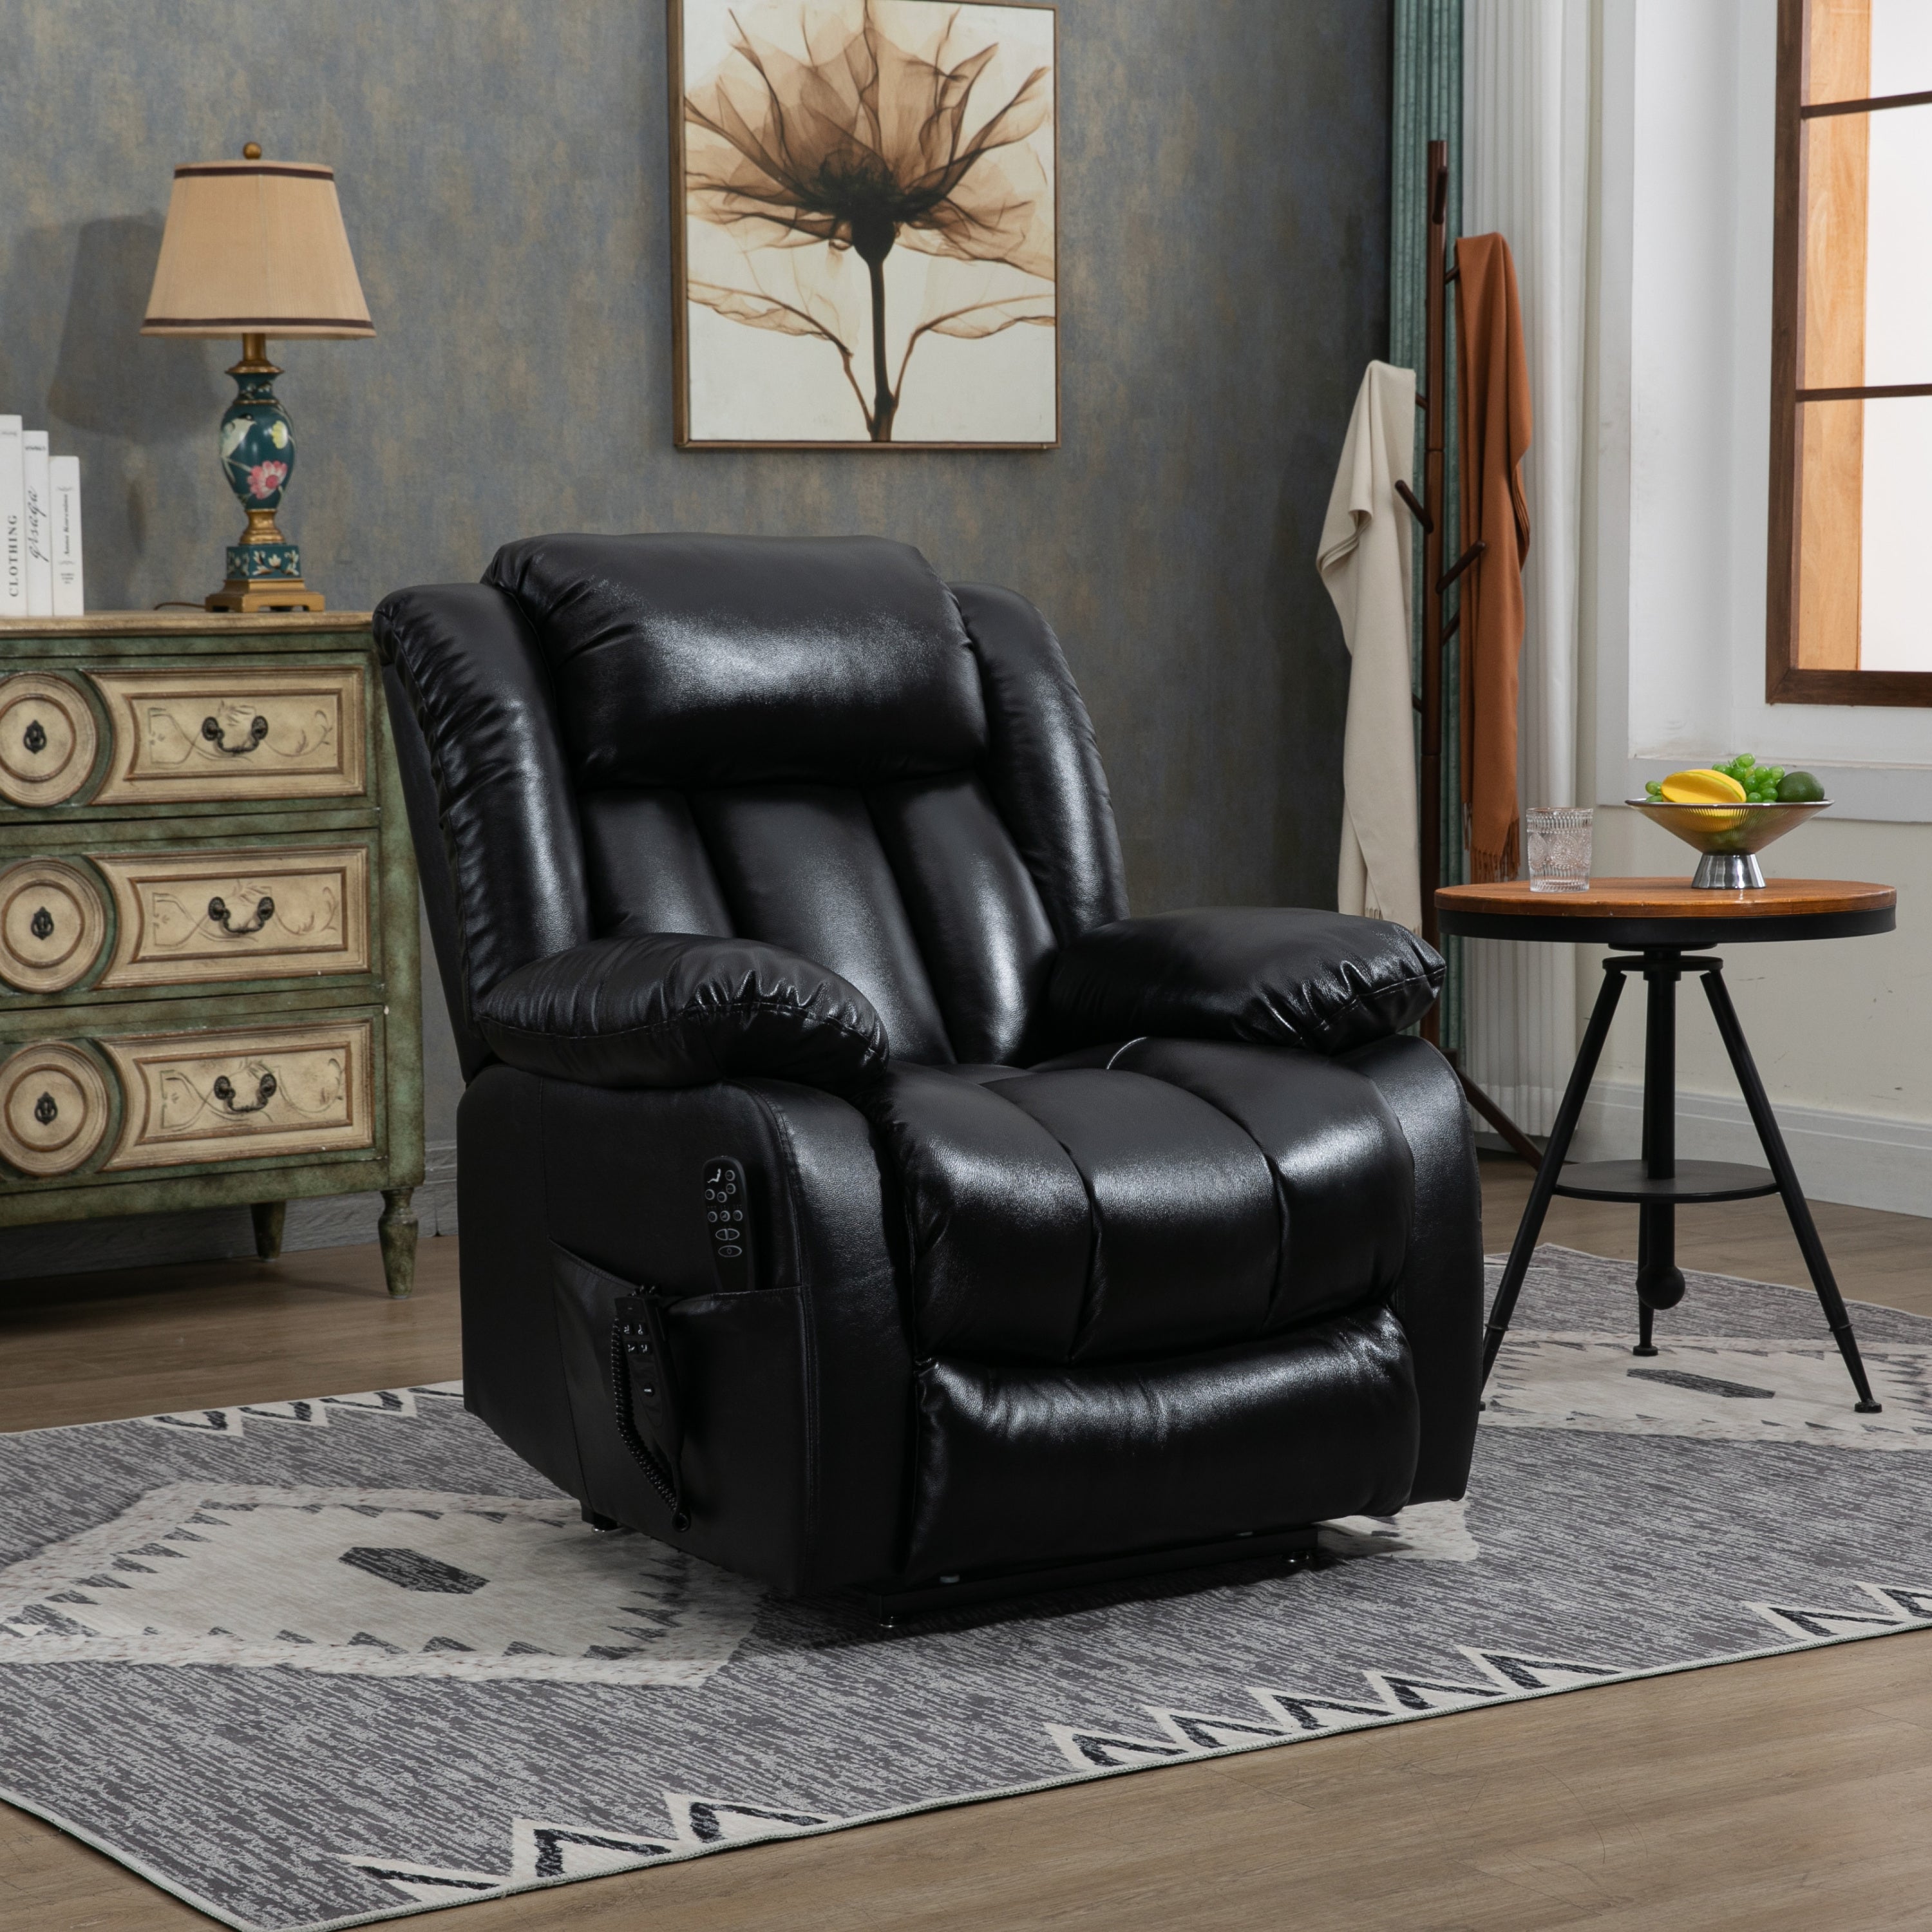 Black Leather Power Lift Recliner Chair, seated